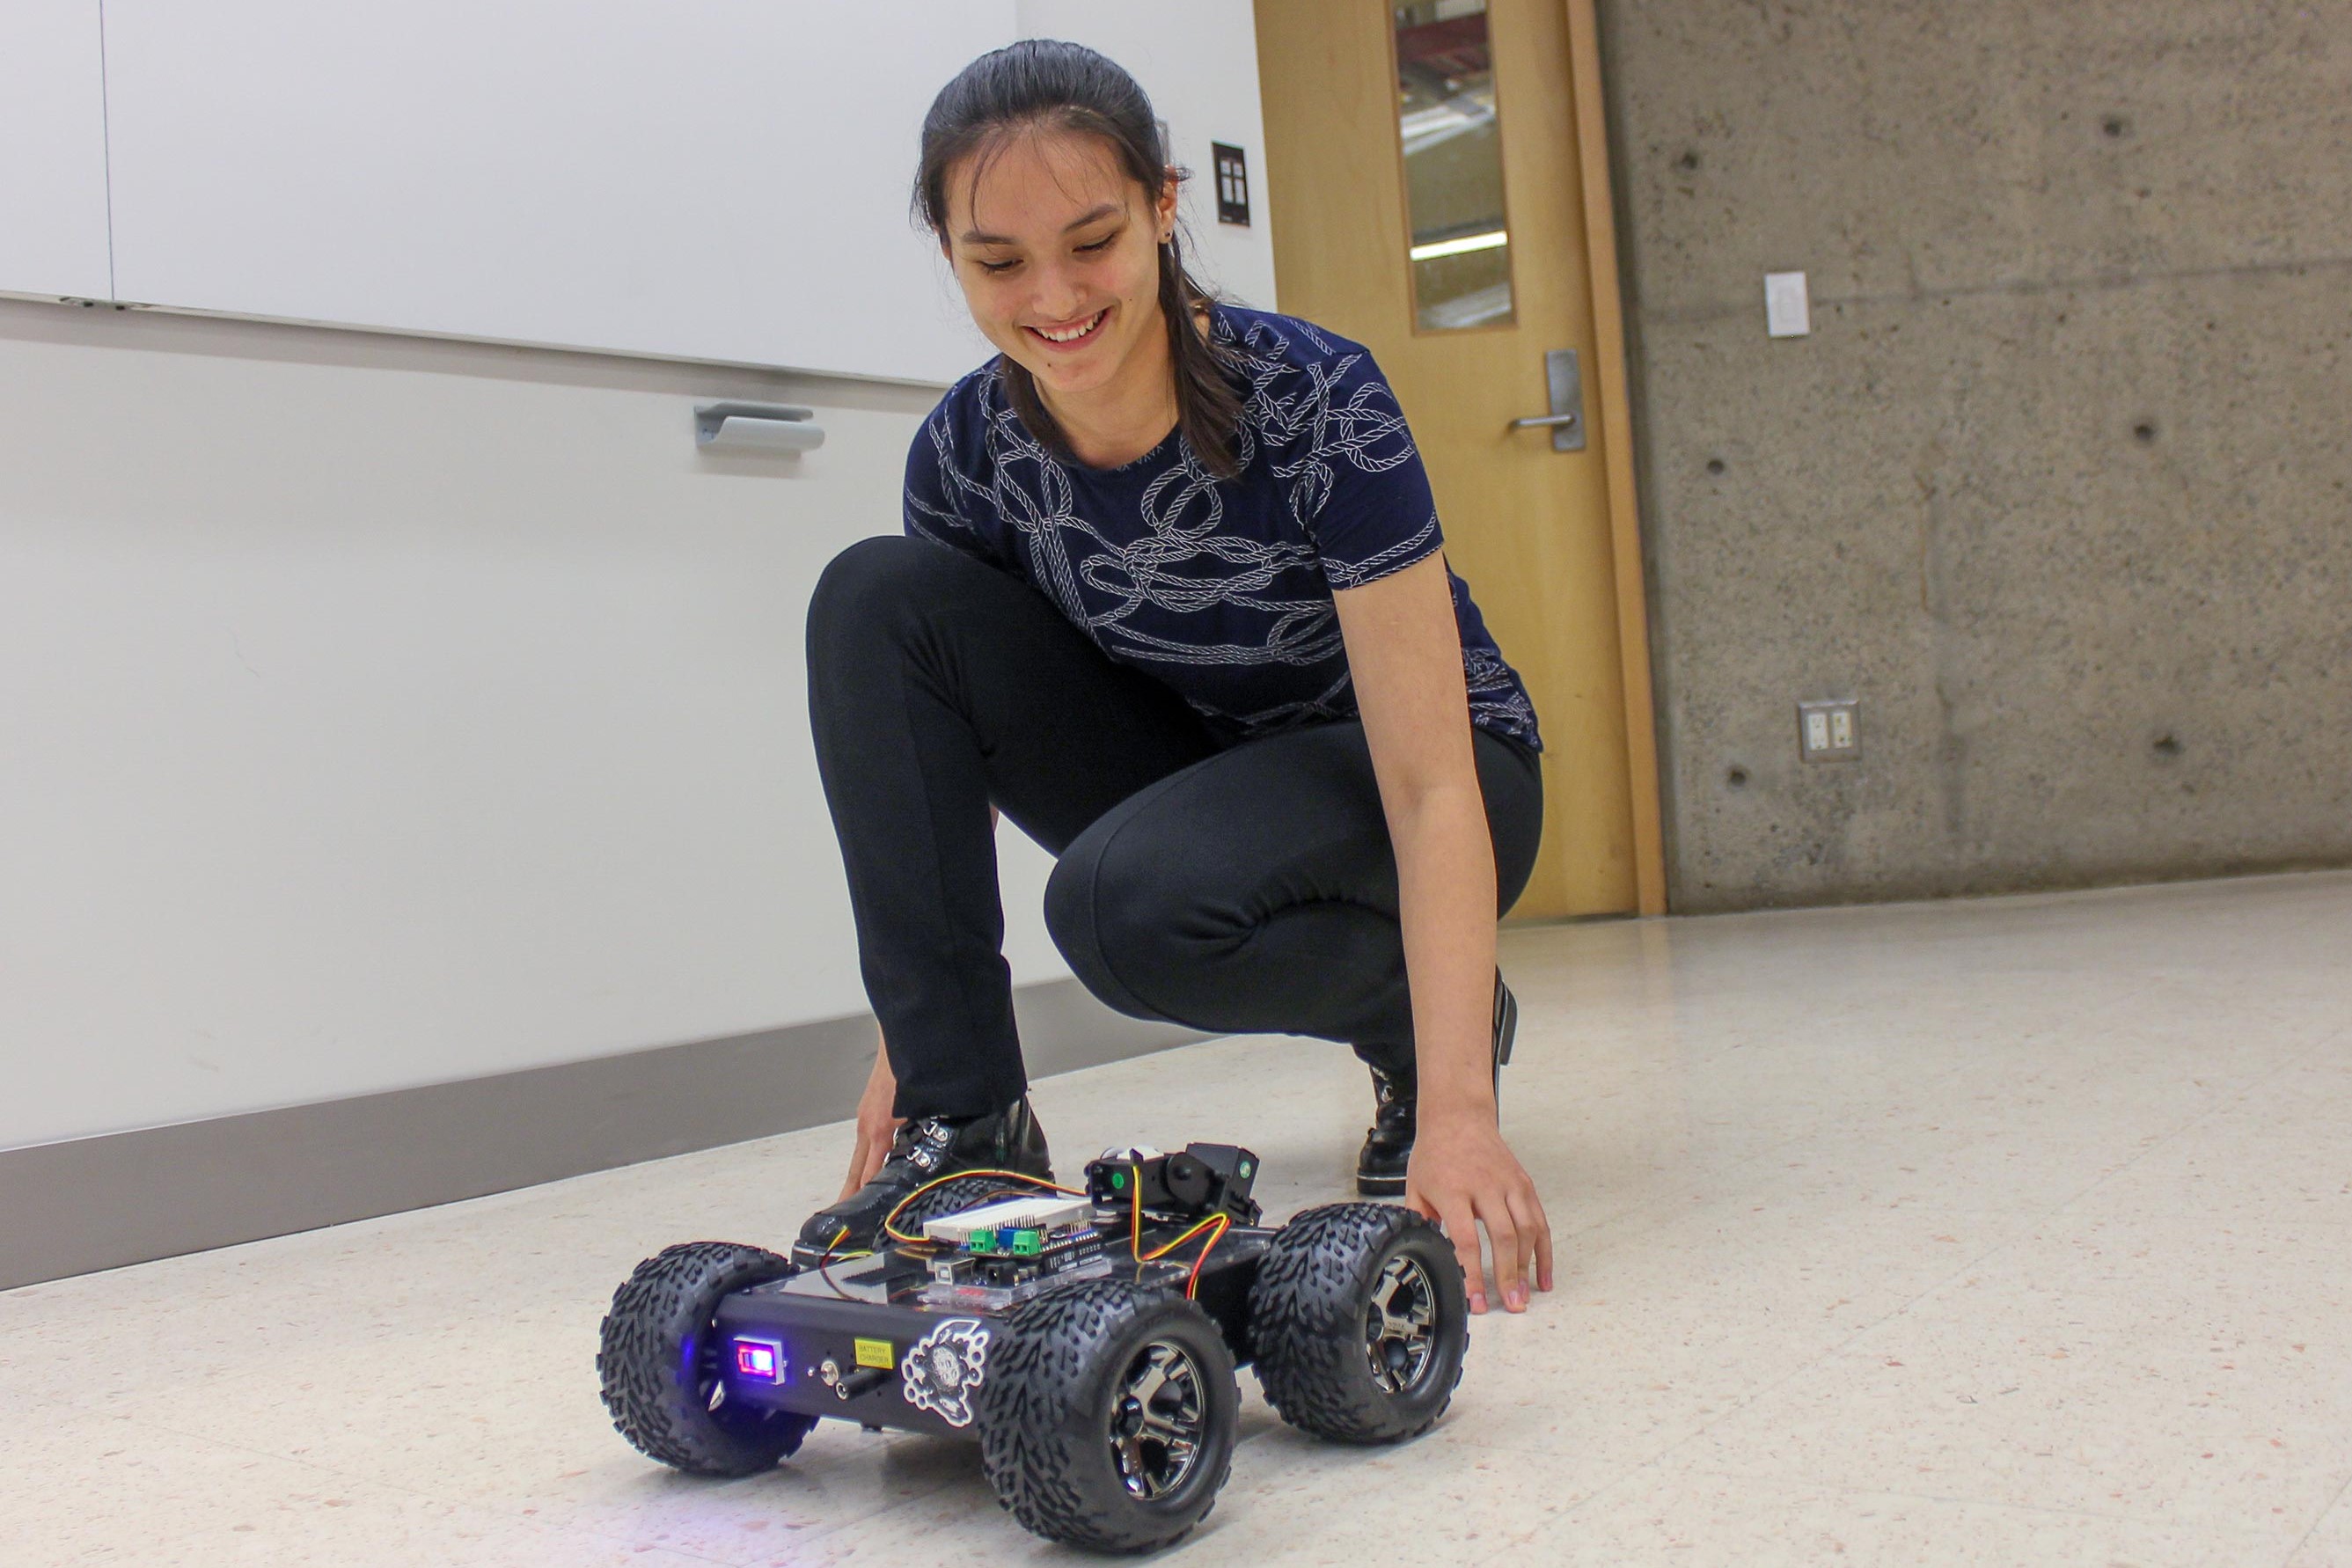 Student smiling next to small robotic vehicle